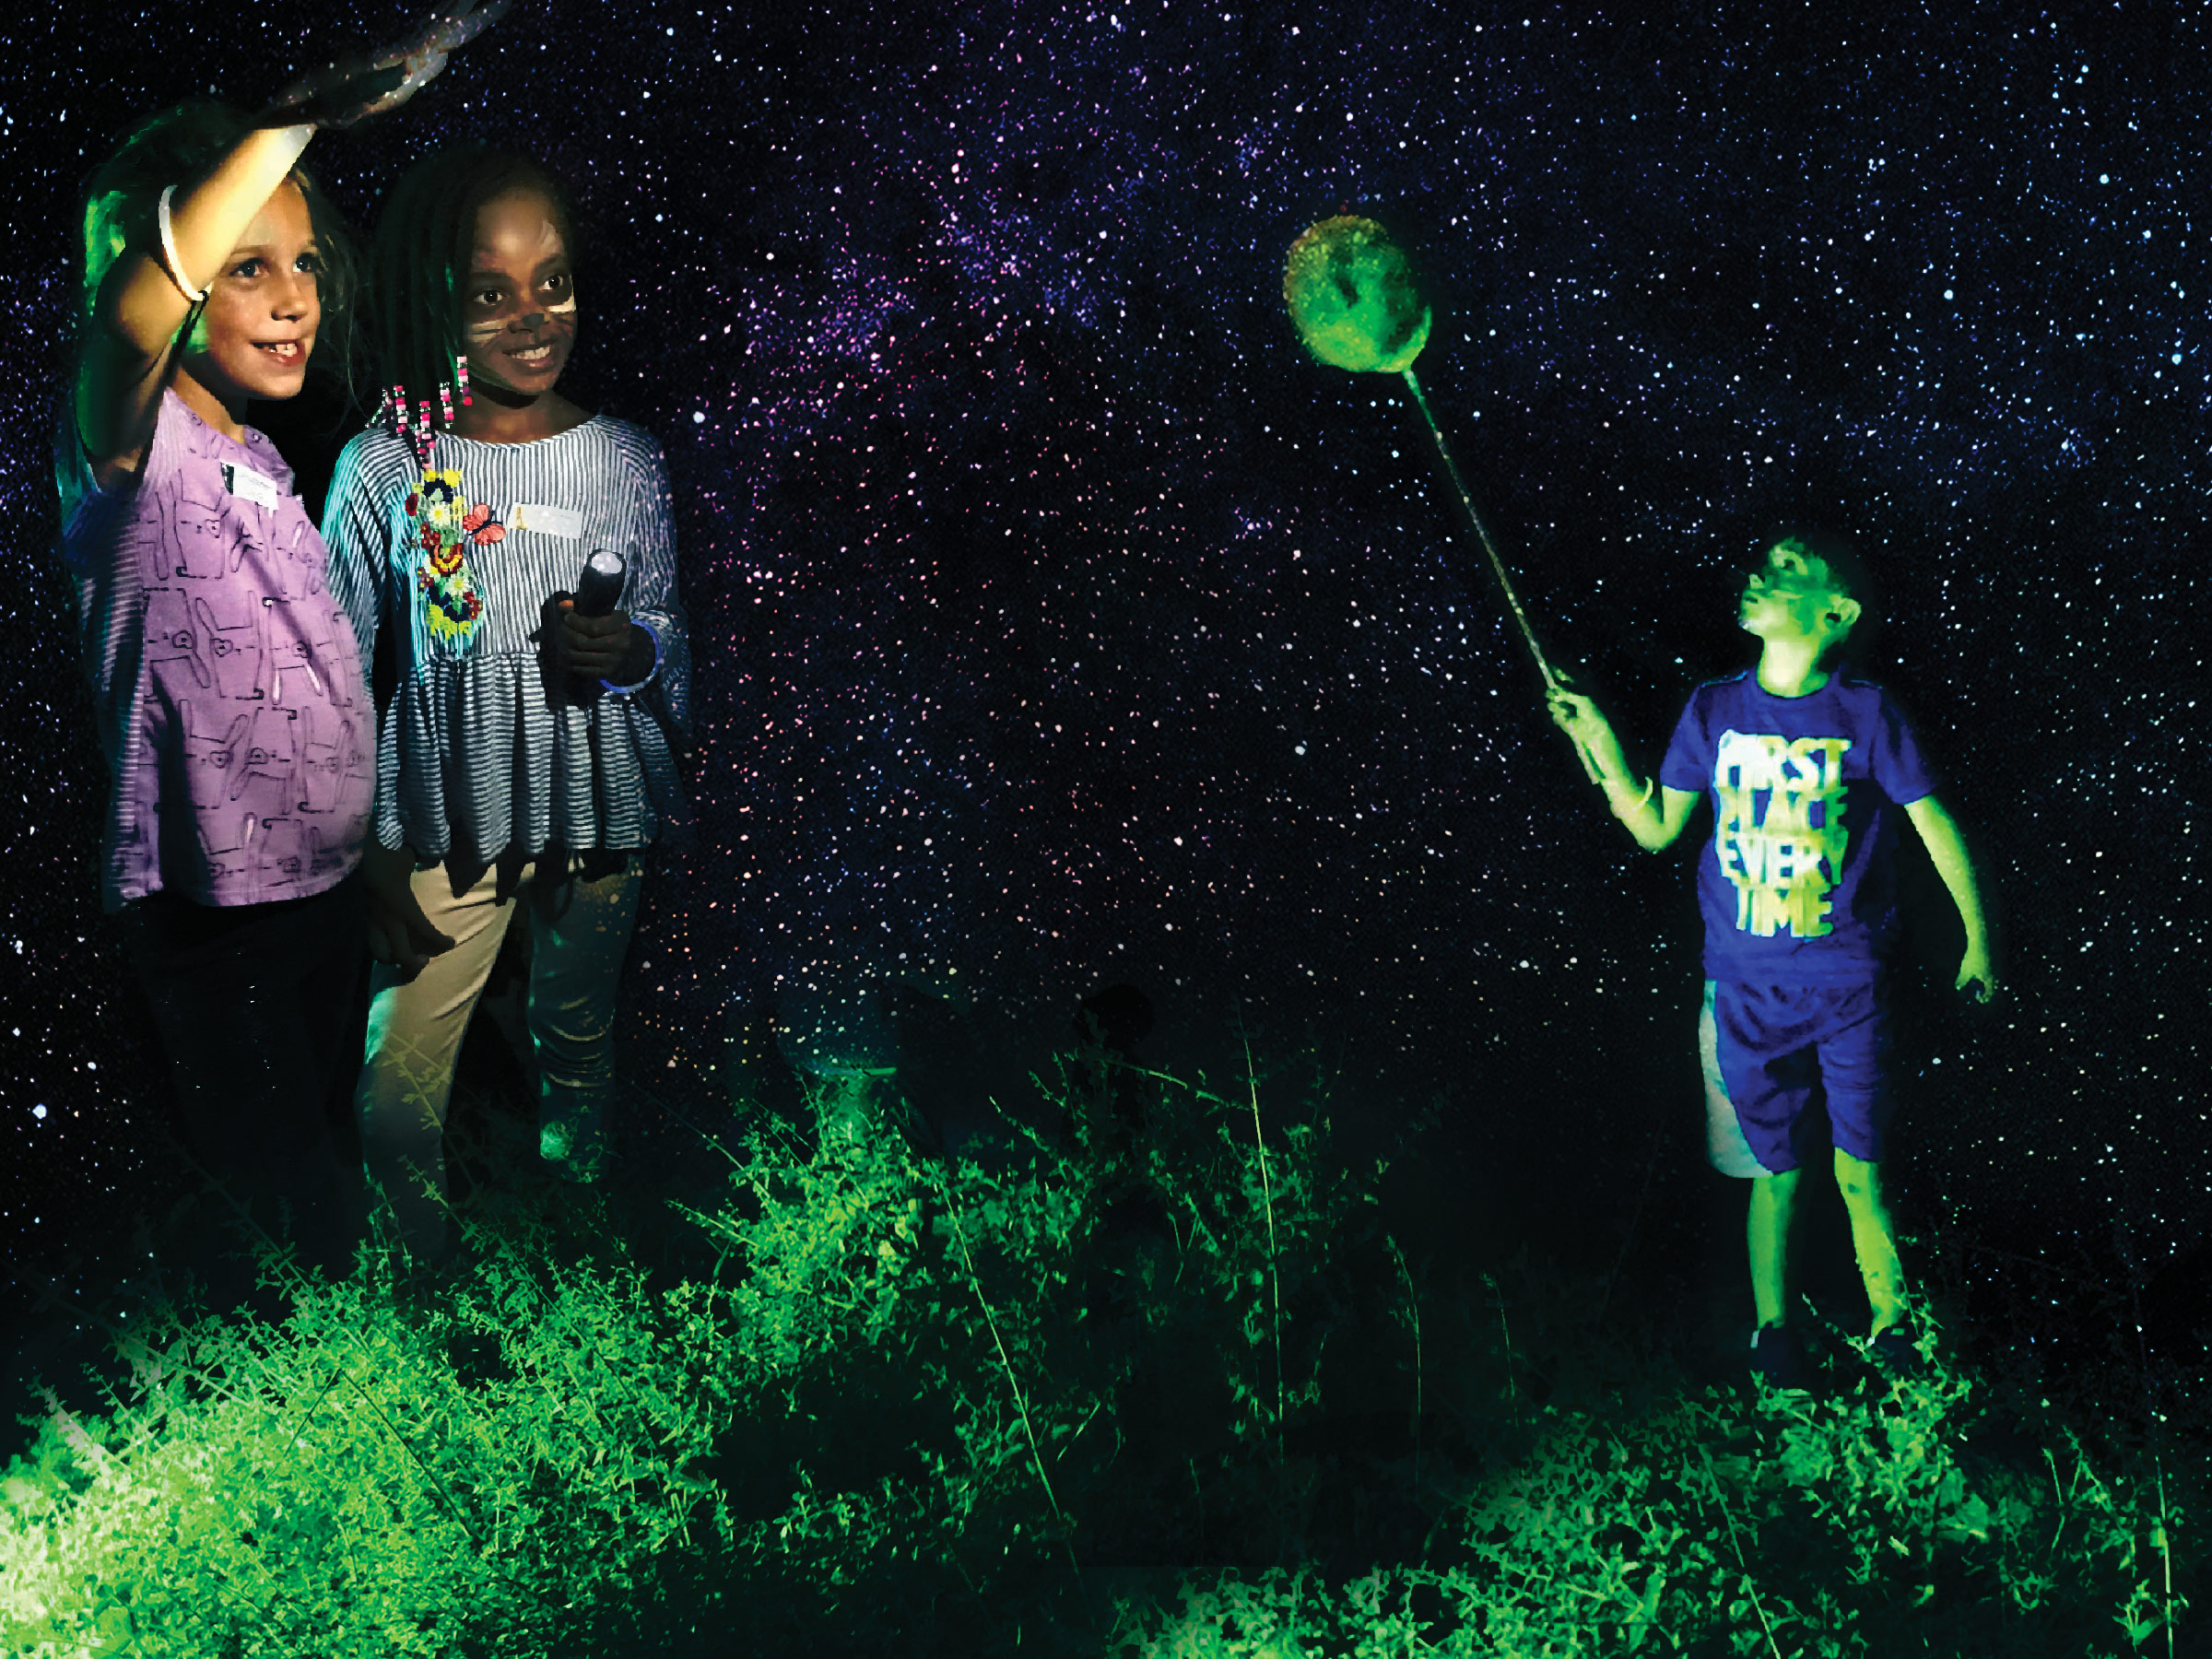 Children searching for moths with flashlight and a net on a dark night.